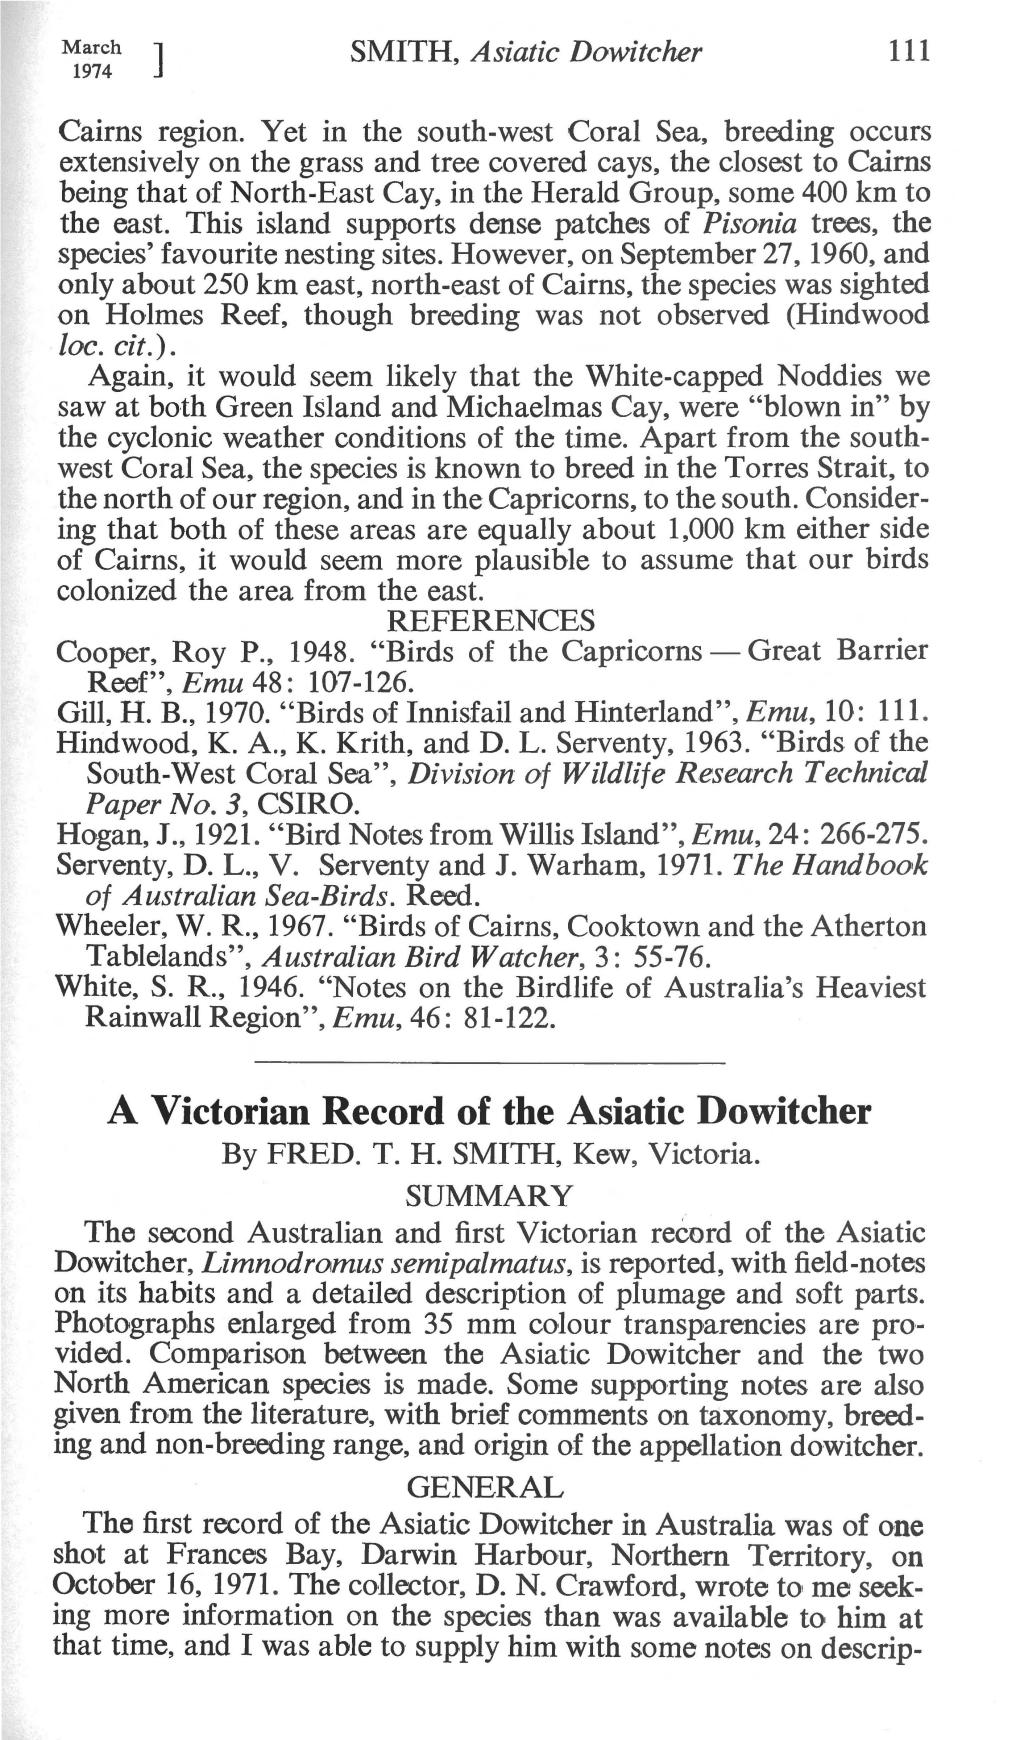 A Victorian Record of the Asiatic Dowitcher by FRED